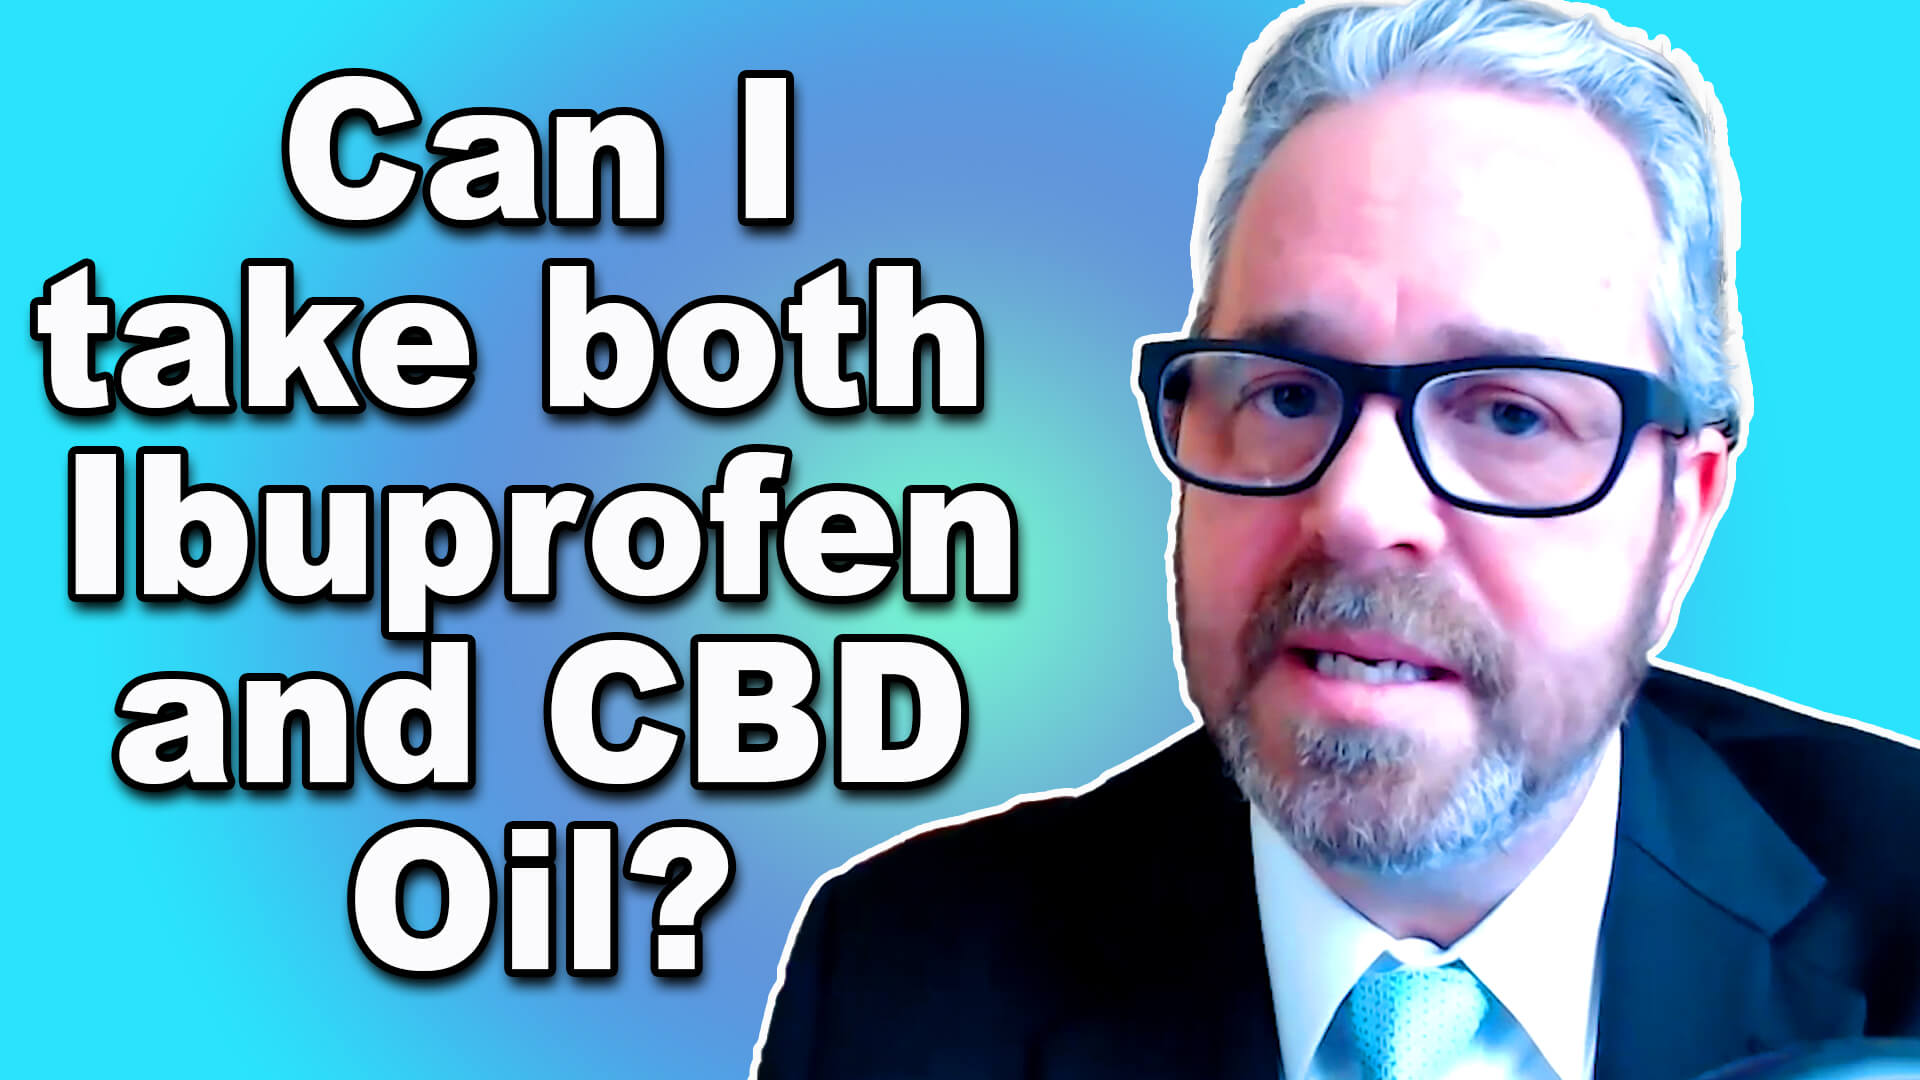 Ask The Doctor: Can I take both Ibuprofen and CBD Oil?